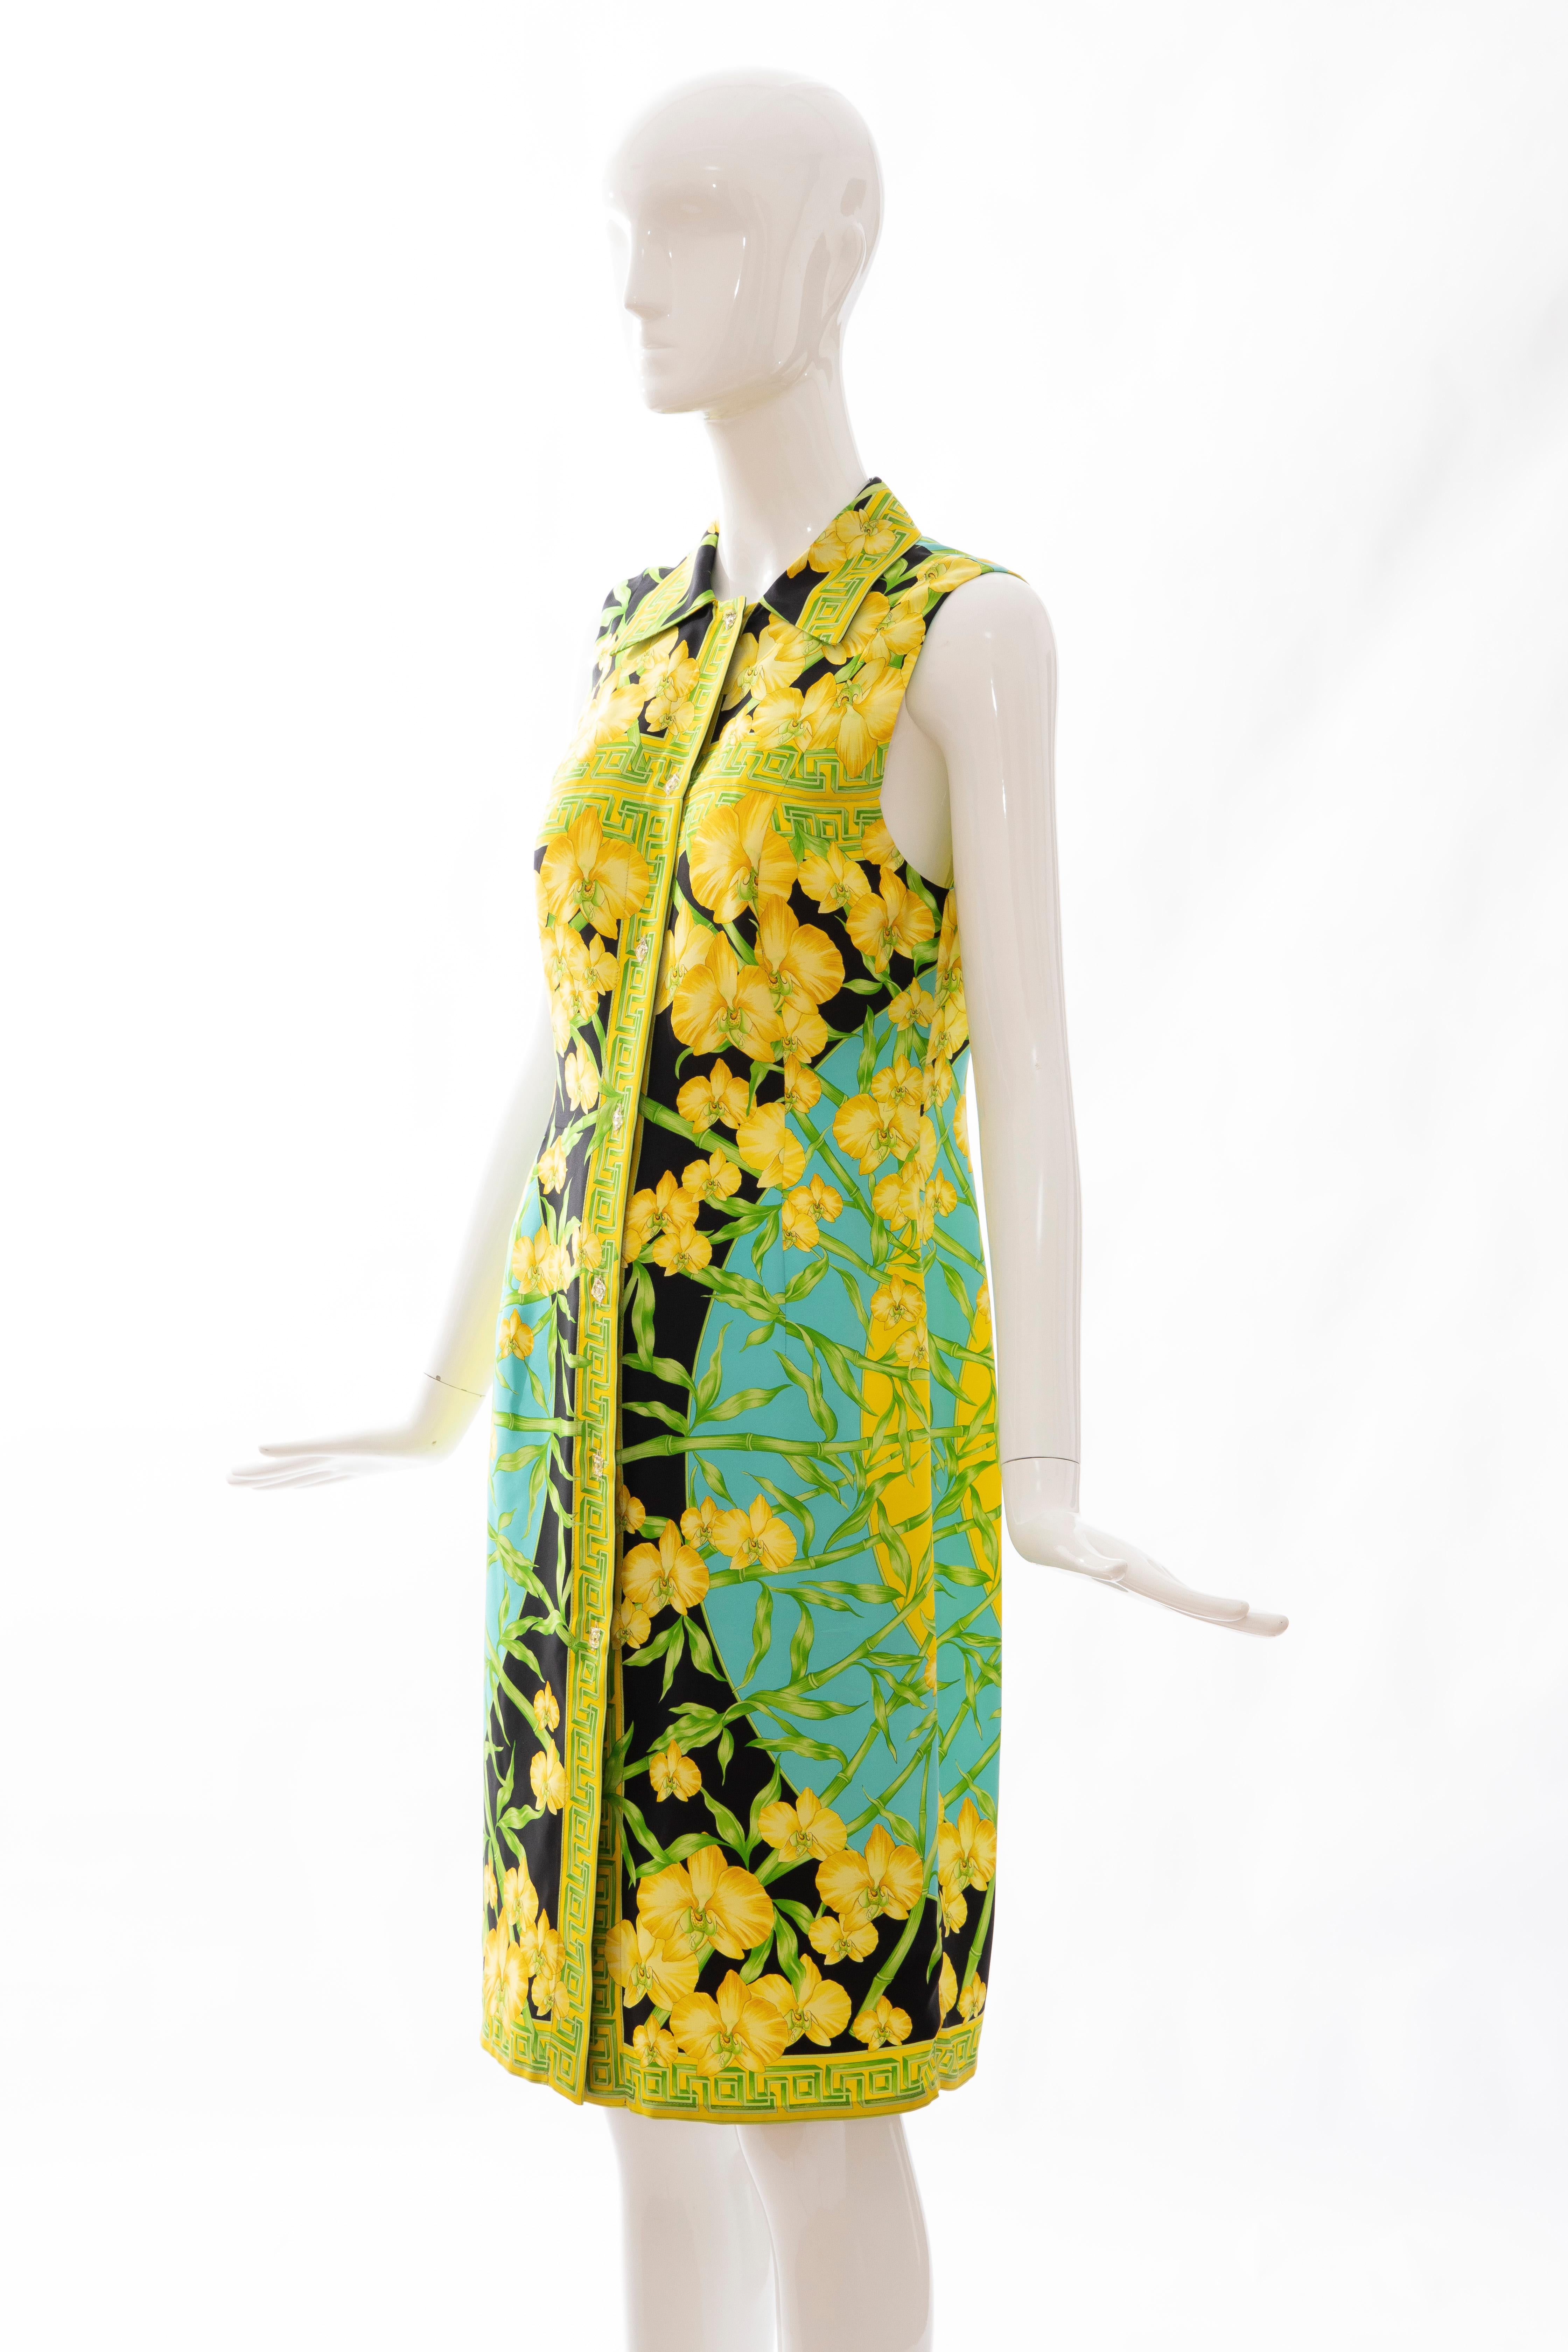 Gianni Versace Couture Silk Printed Yellow Orchids Sheath Dress, Circa: 1990's 5